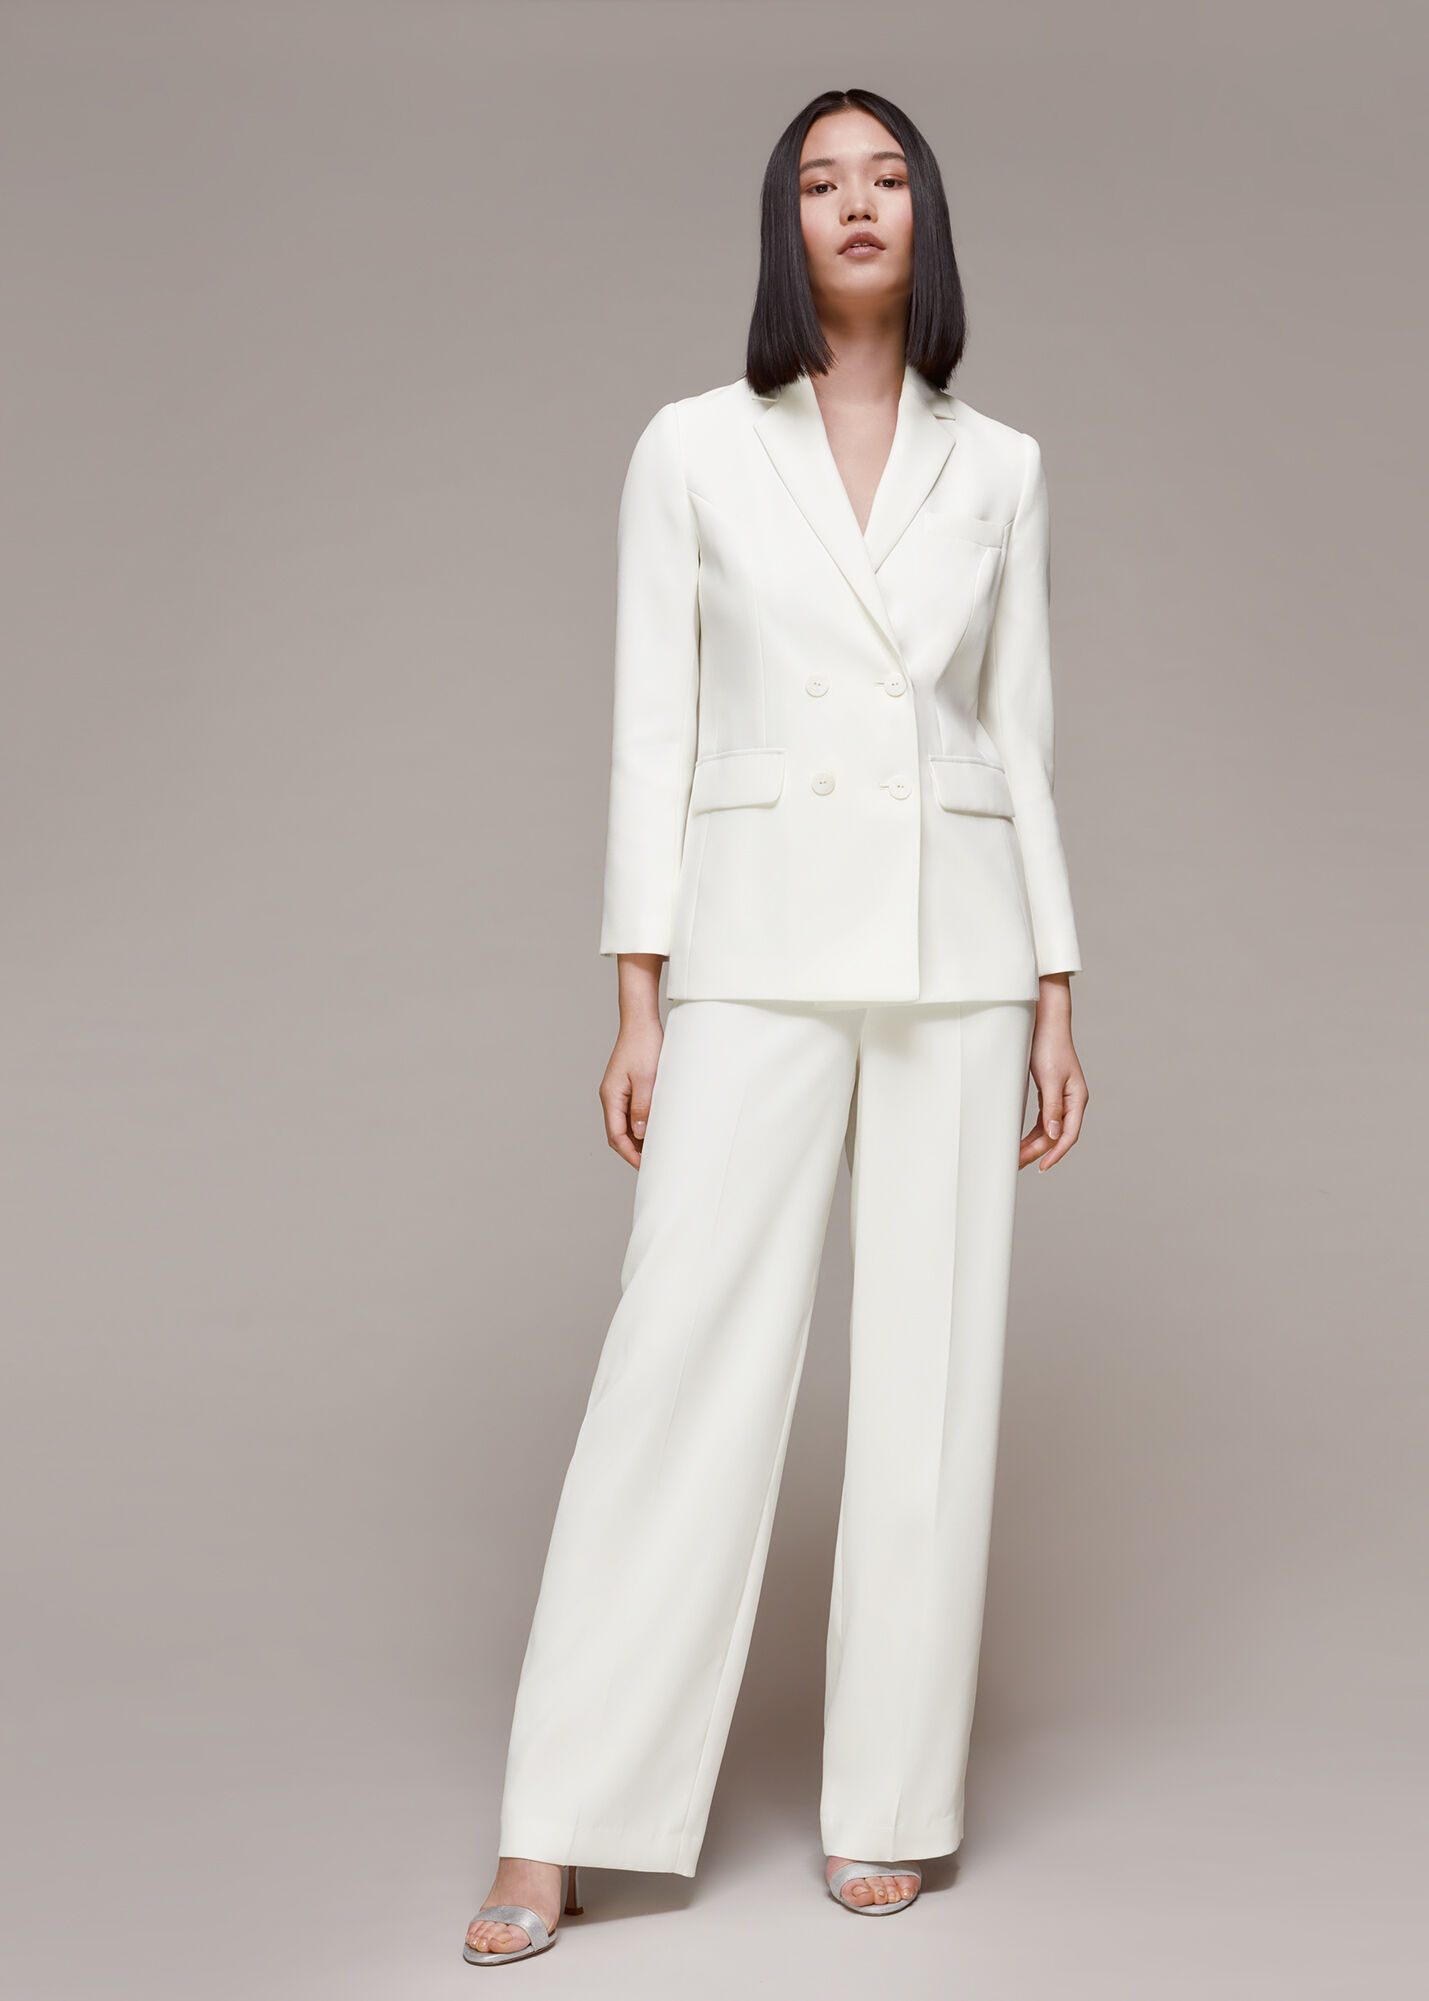 trouser suits for weddings